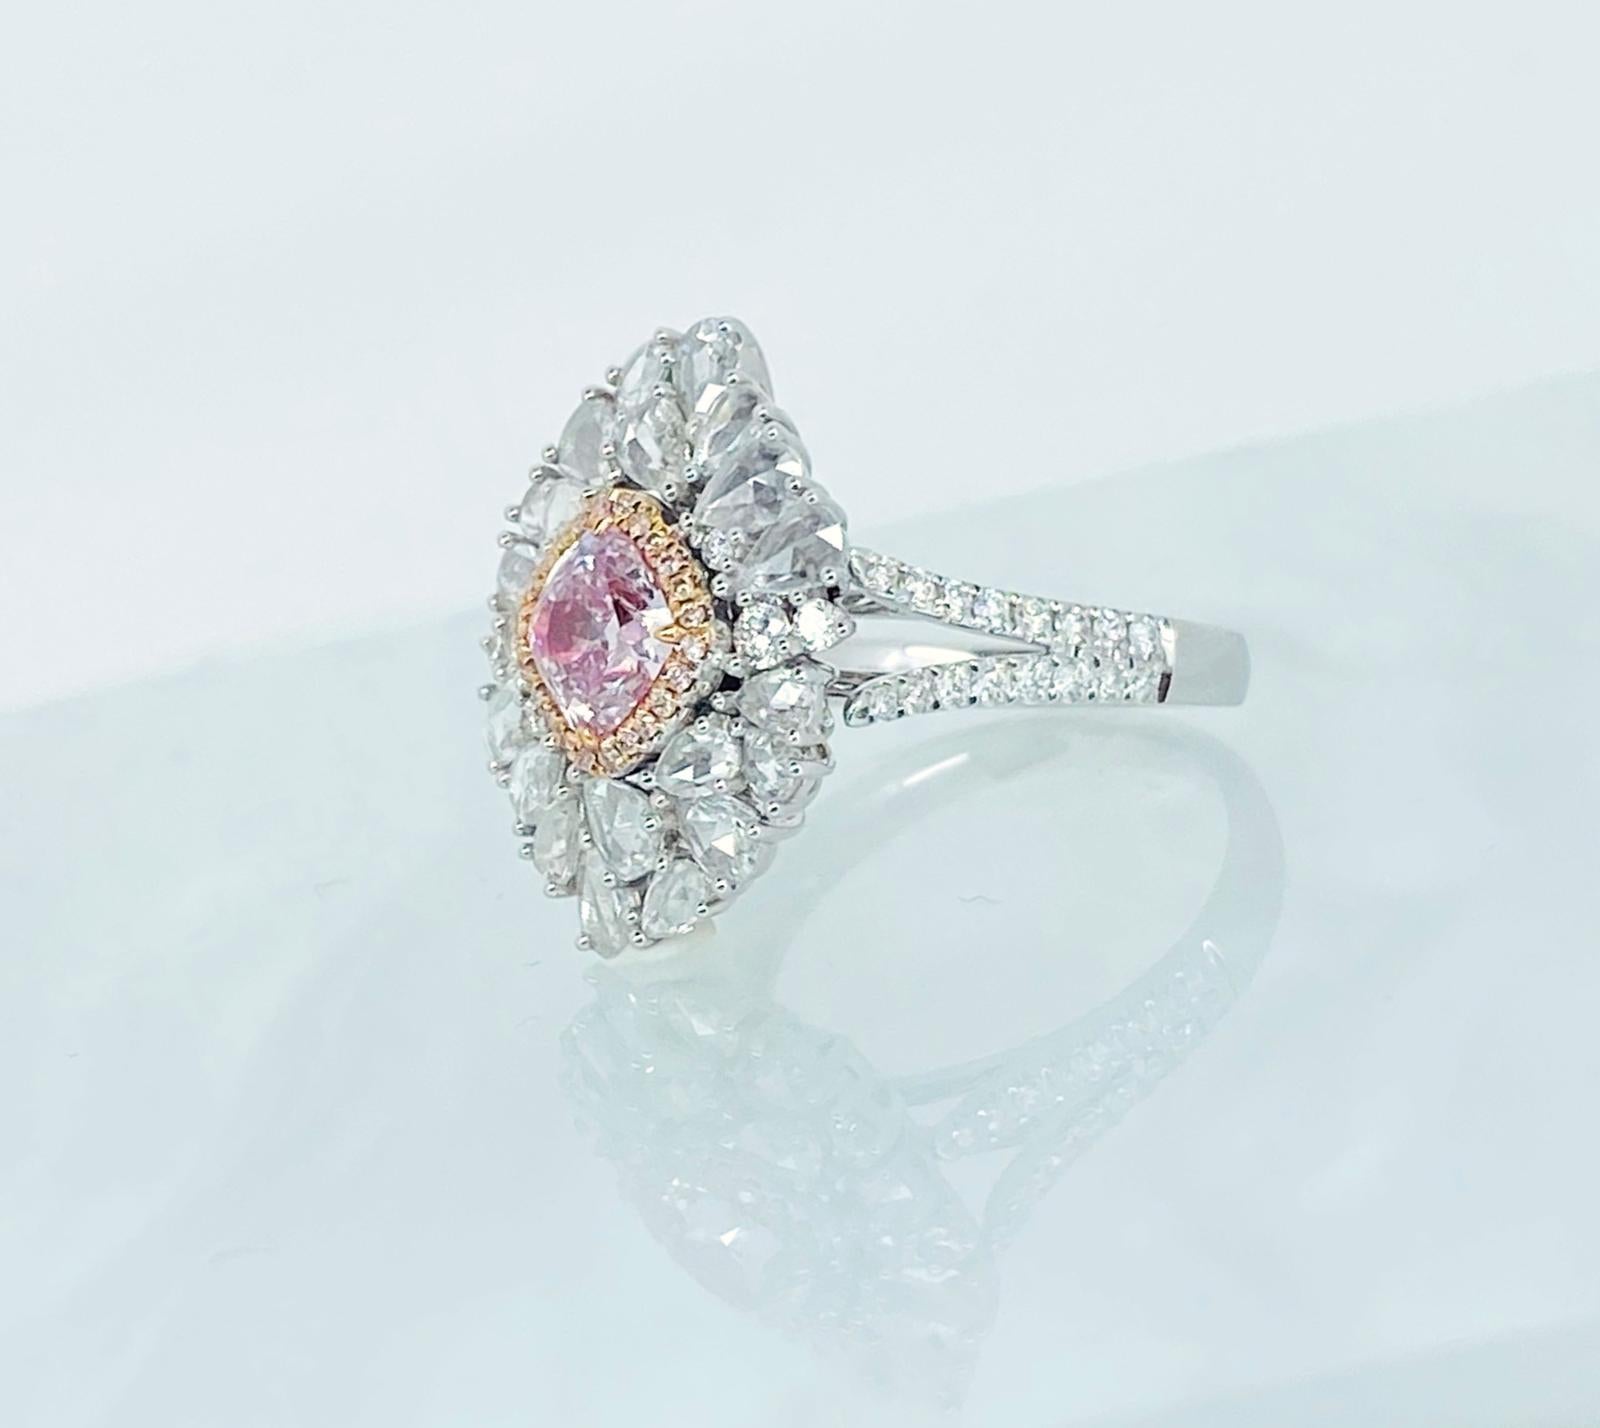 Women's GIA Certified 1.01 Carat Light Pink Diamond Ring VS2 Clarity For Sale